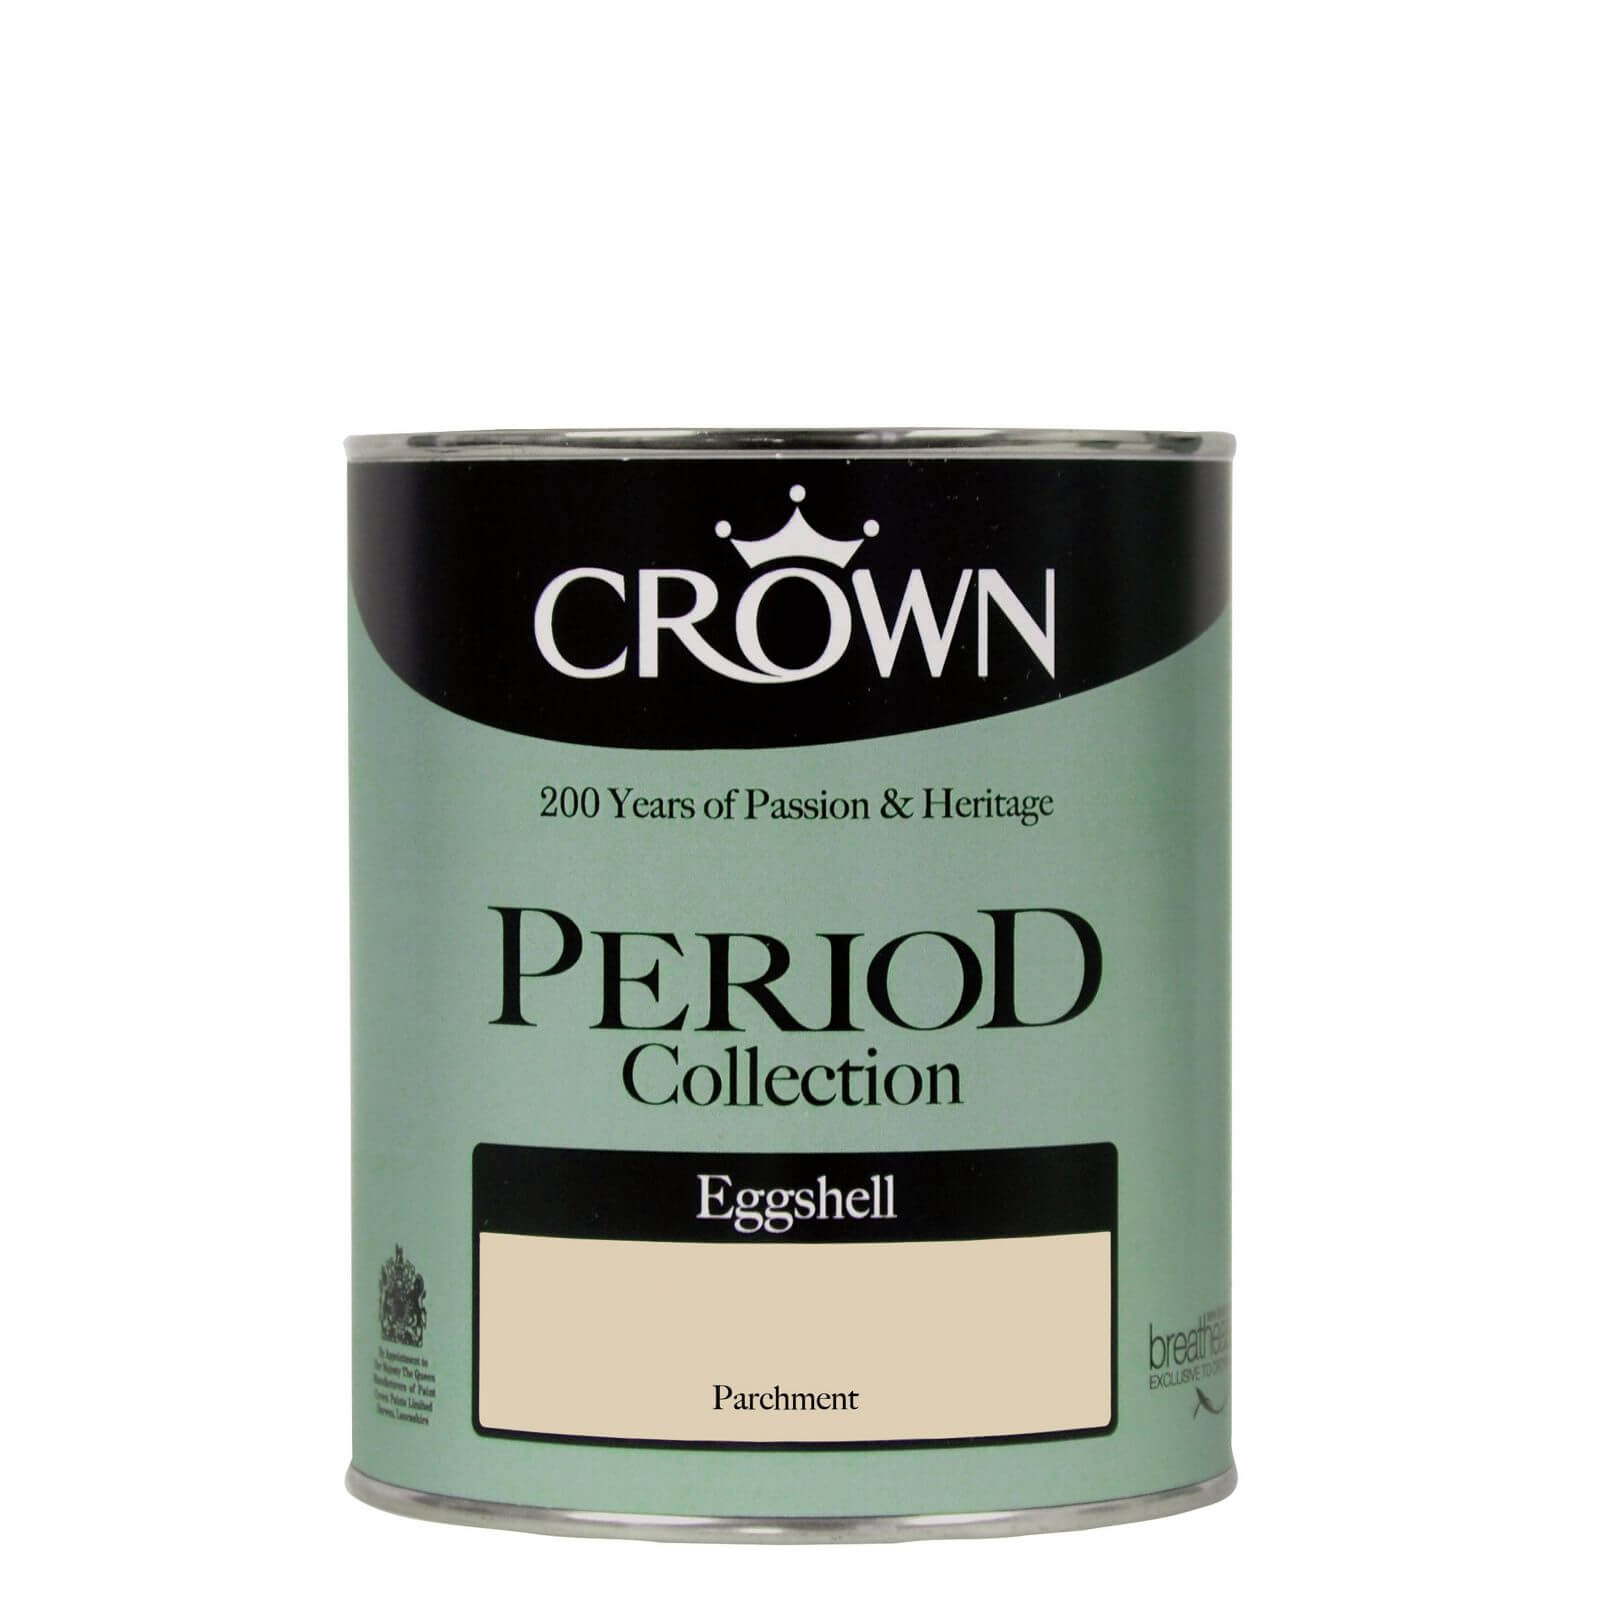 Crown Period Collection Parchment - Eggshell Paint - 750ml